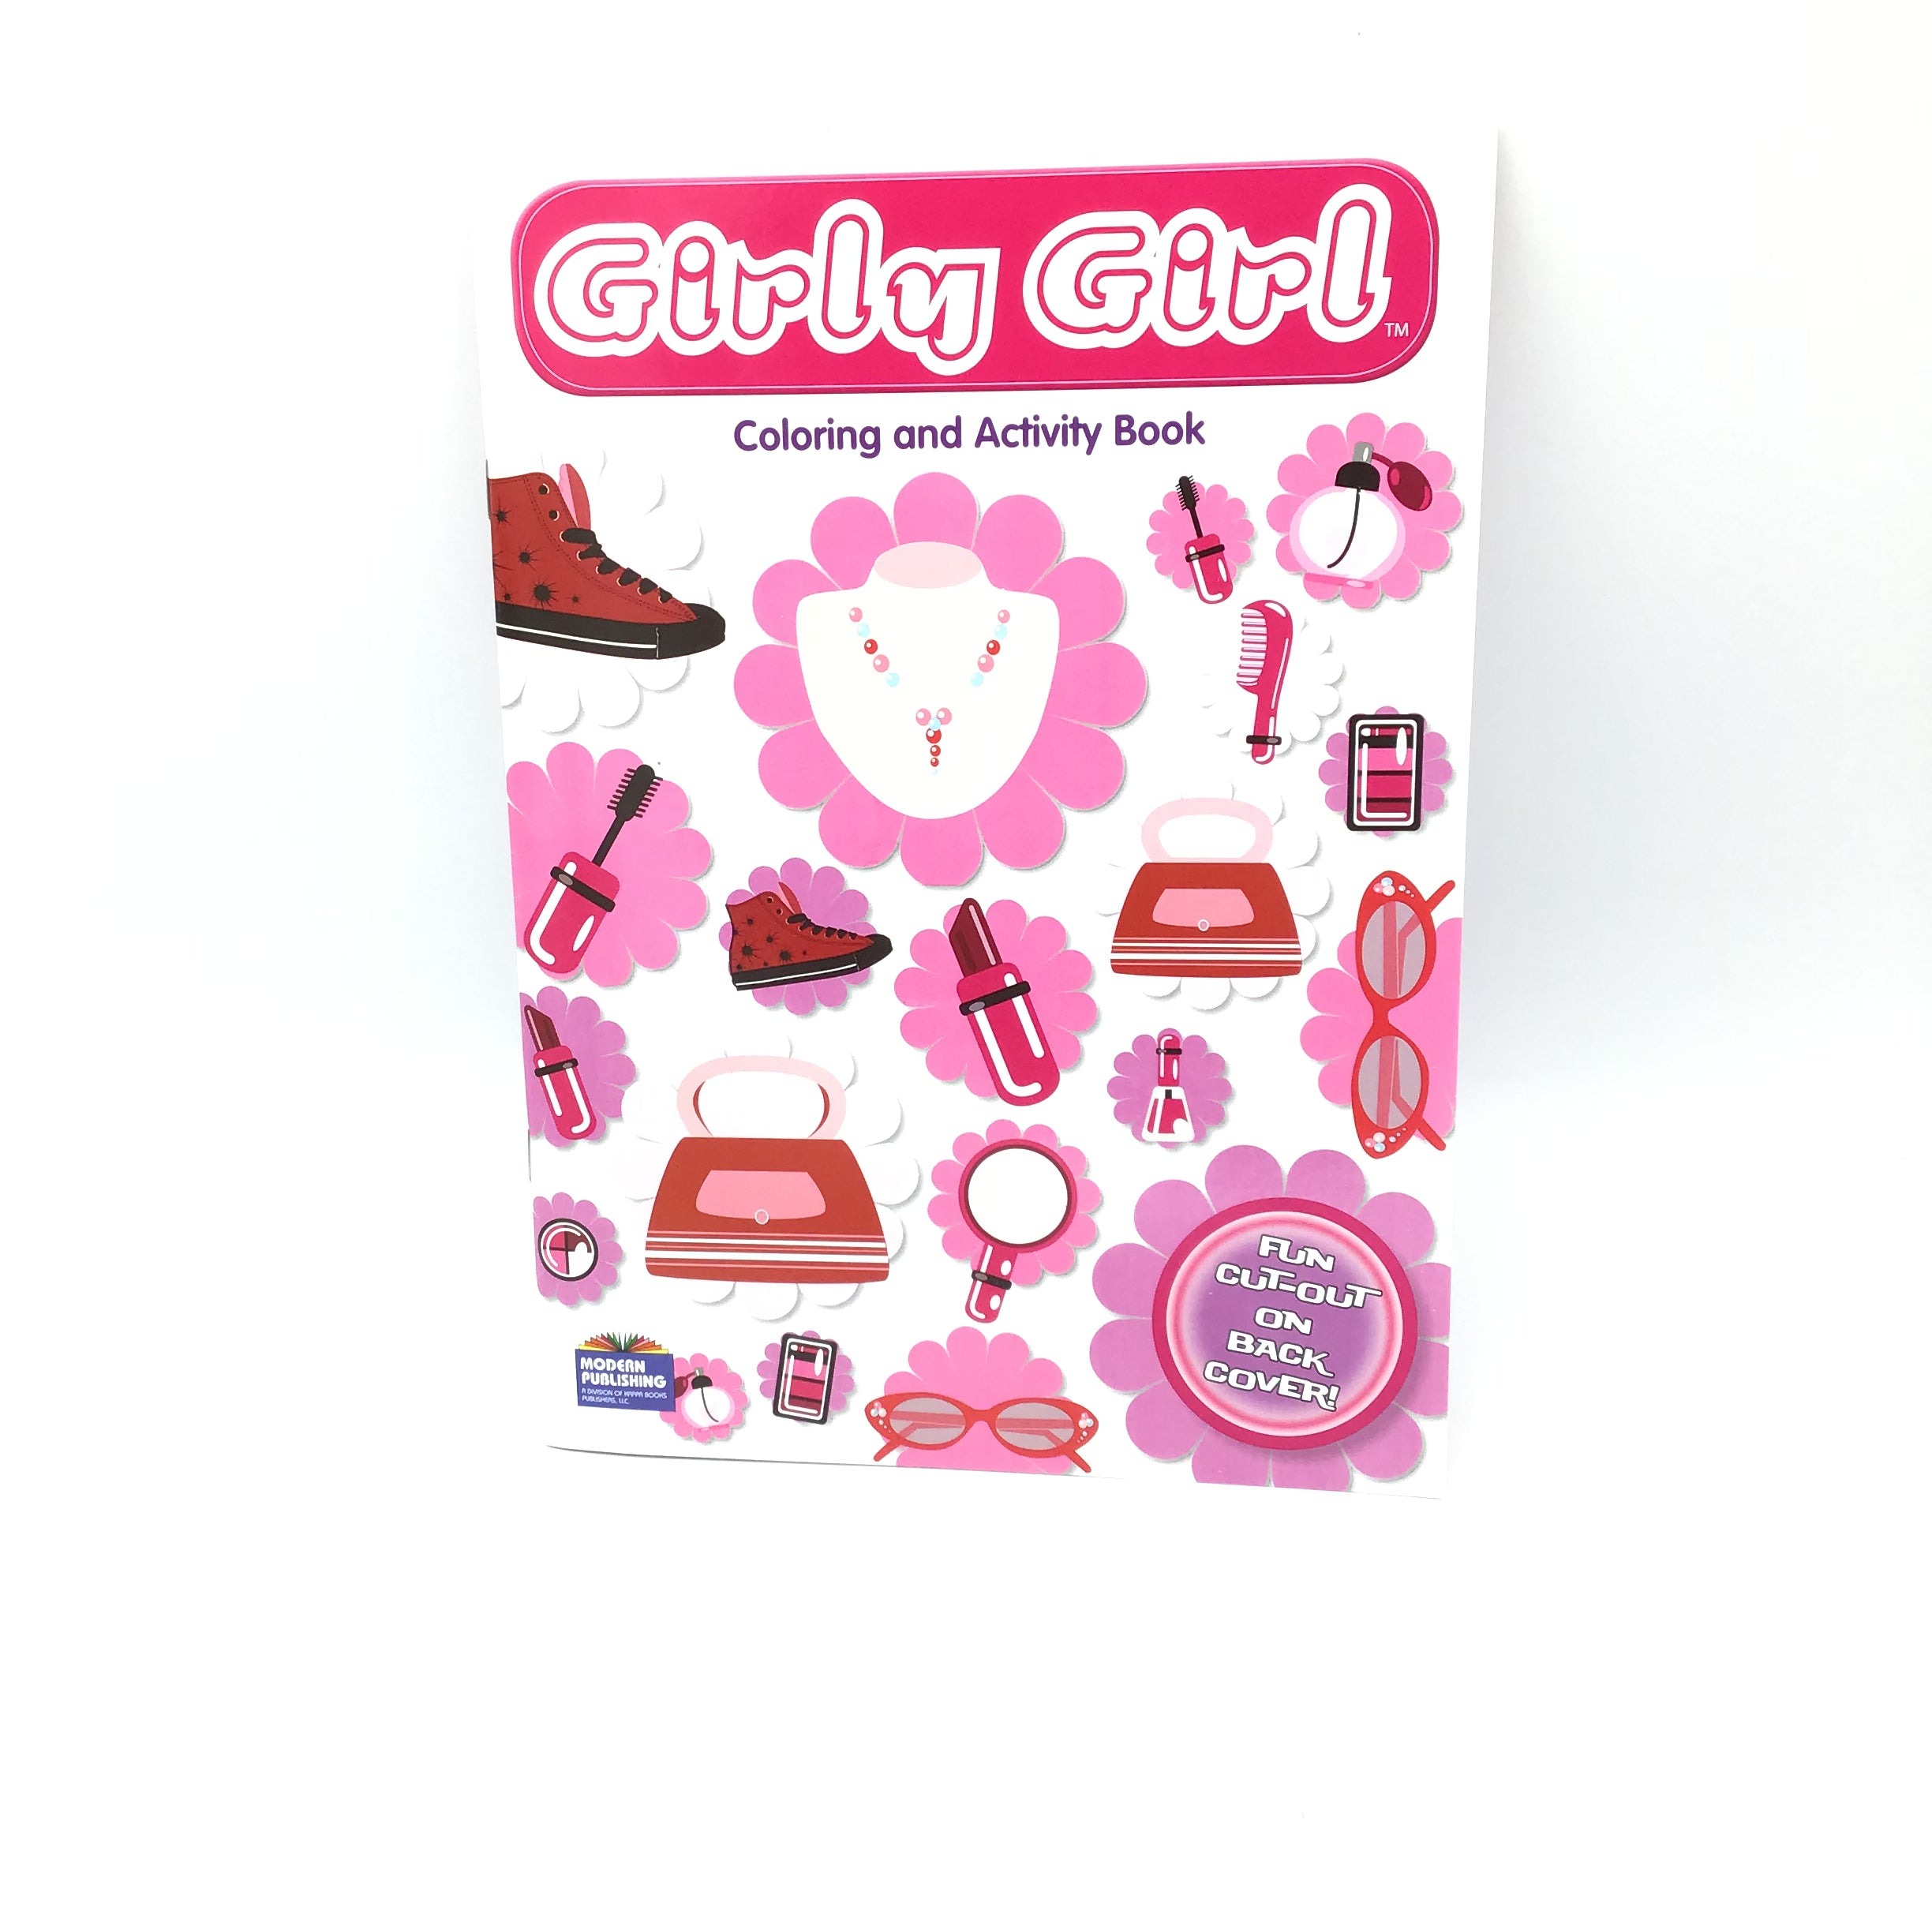 Girly Girl Coloring and Activity book